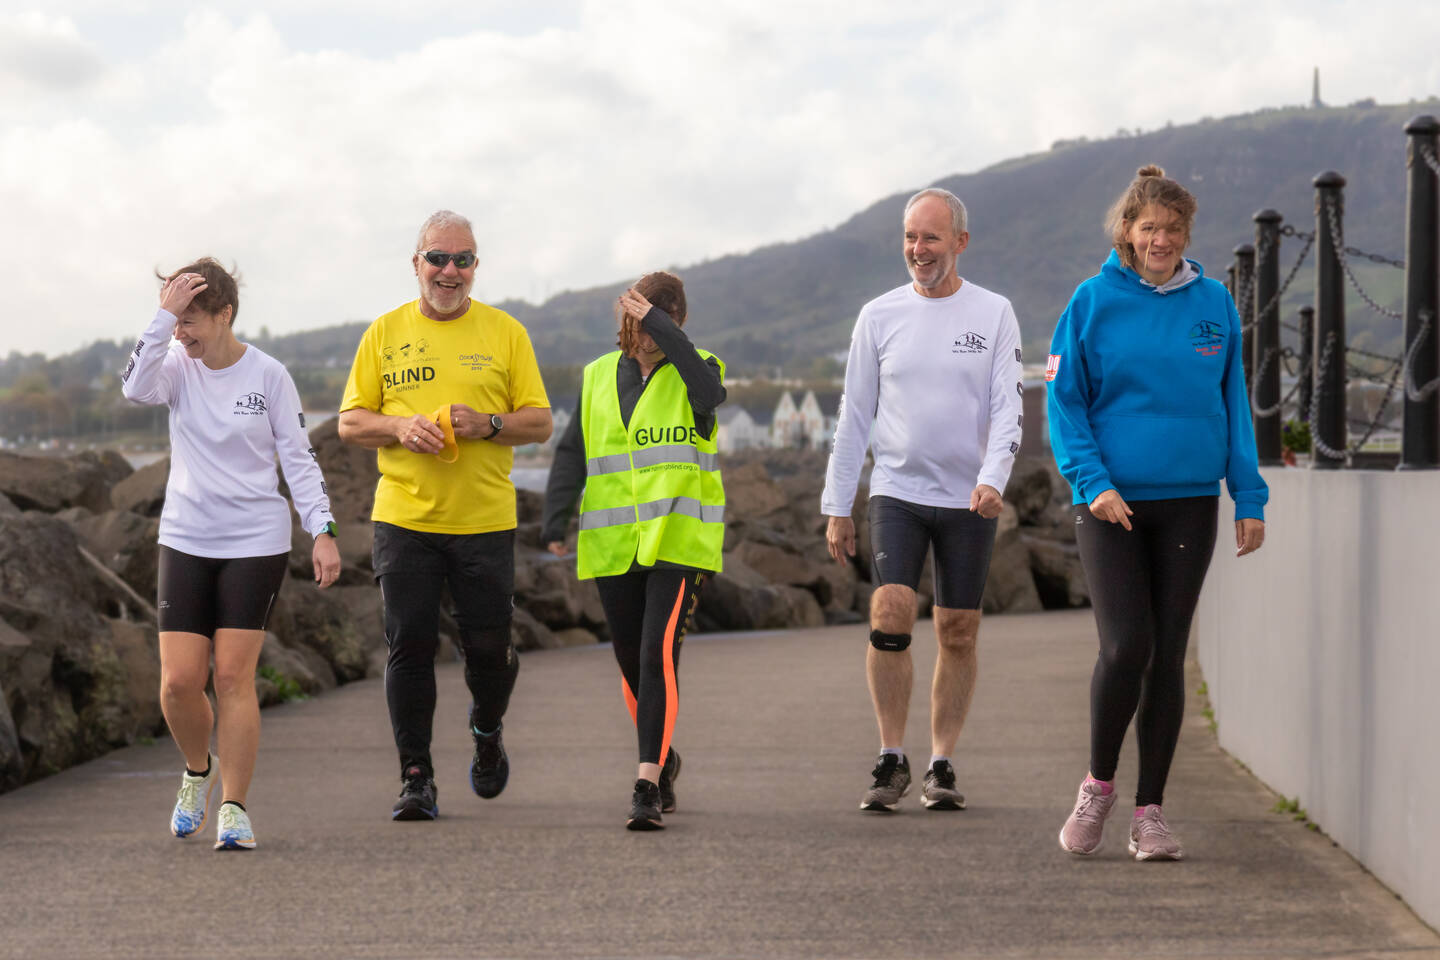 Man with a visual impairment running alongside his guide runner and other runners by the seaside.